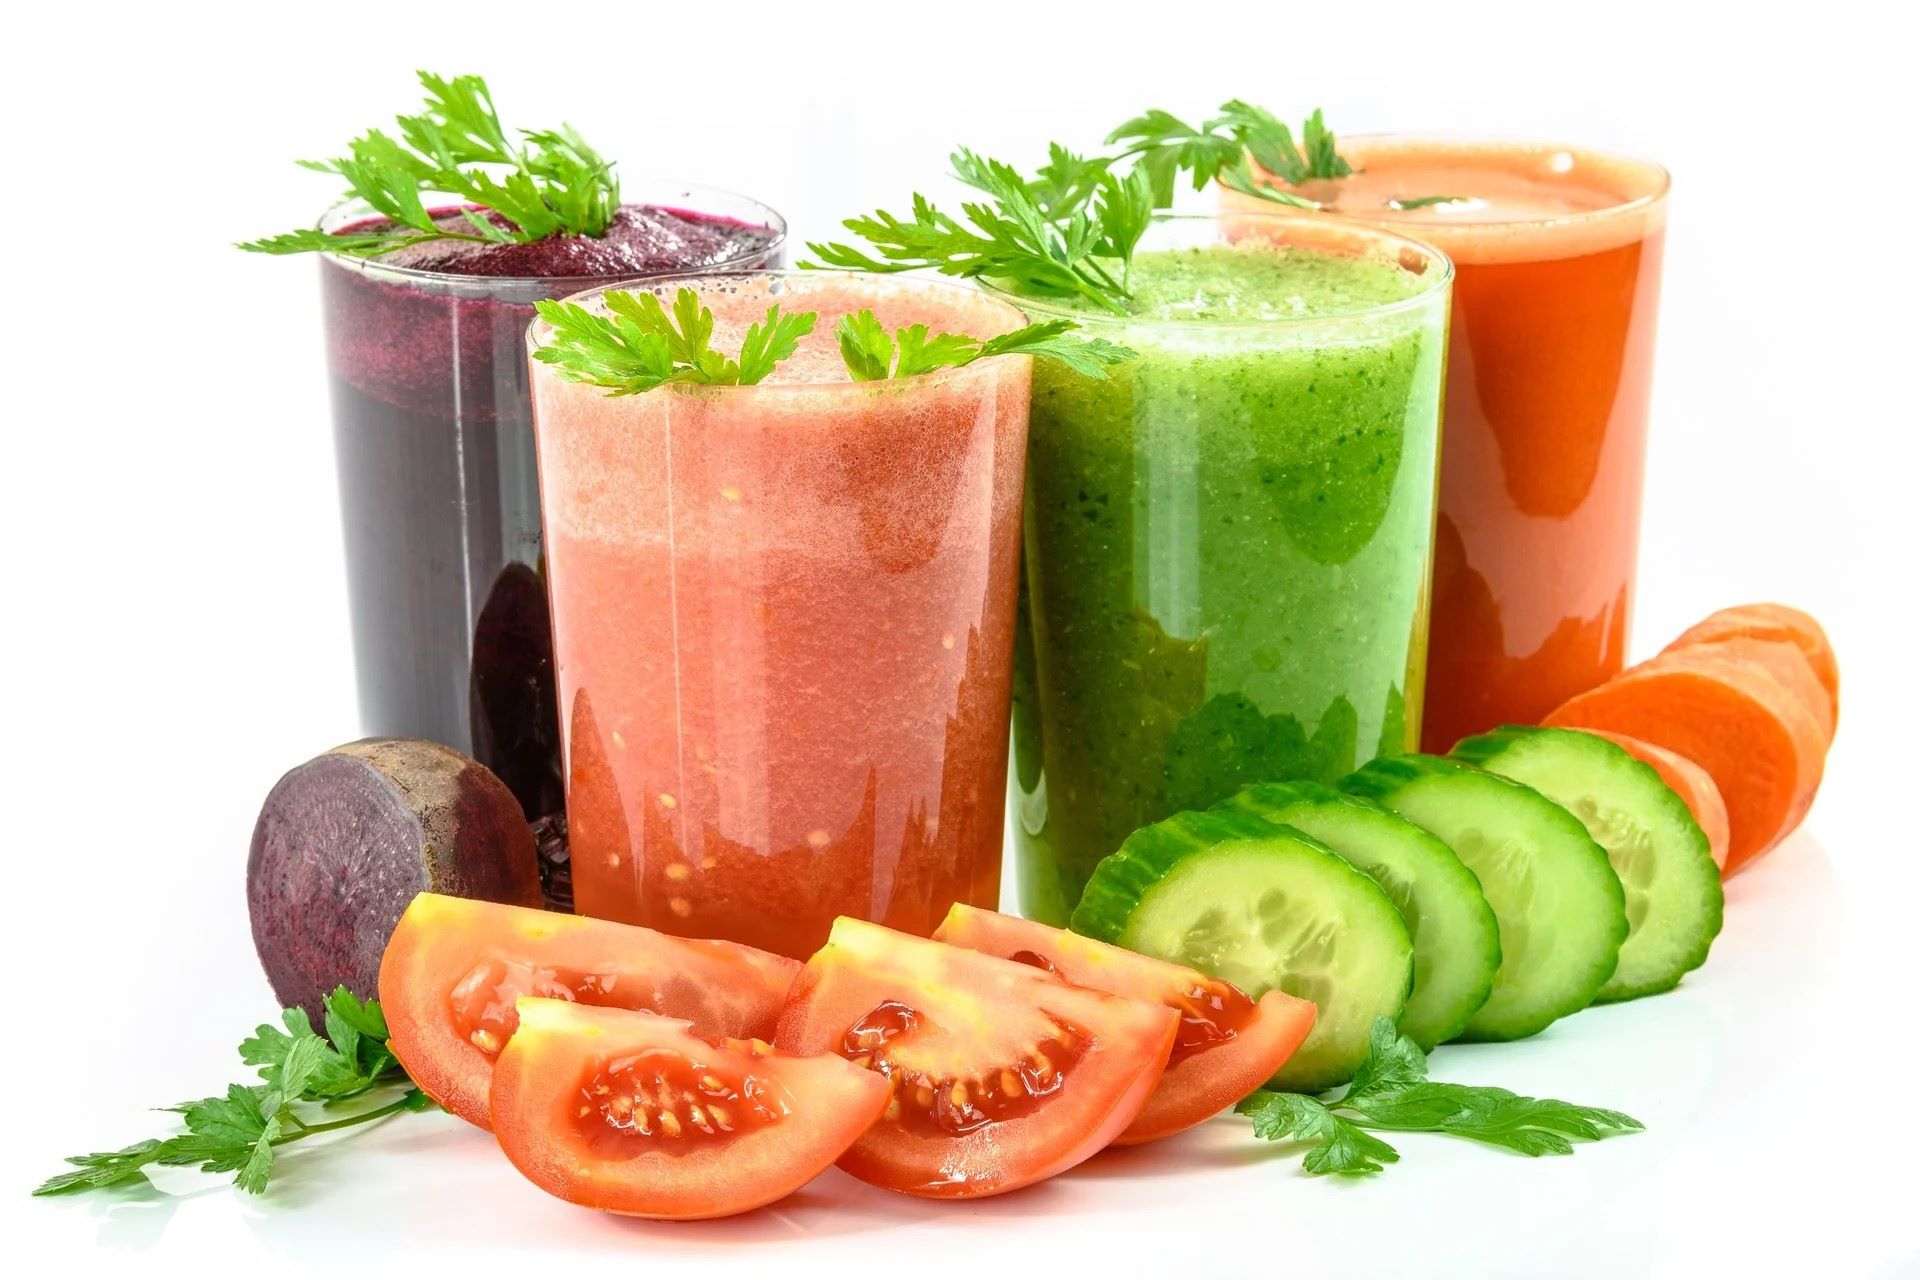 How To Use Smoothies To Lower Your Cholesterol Levels